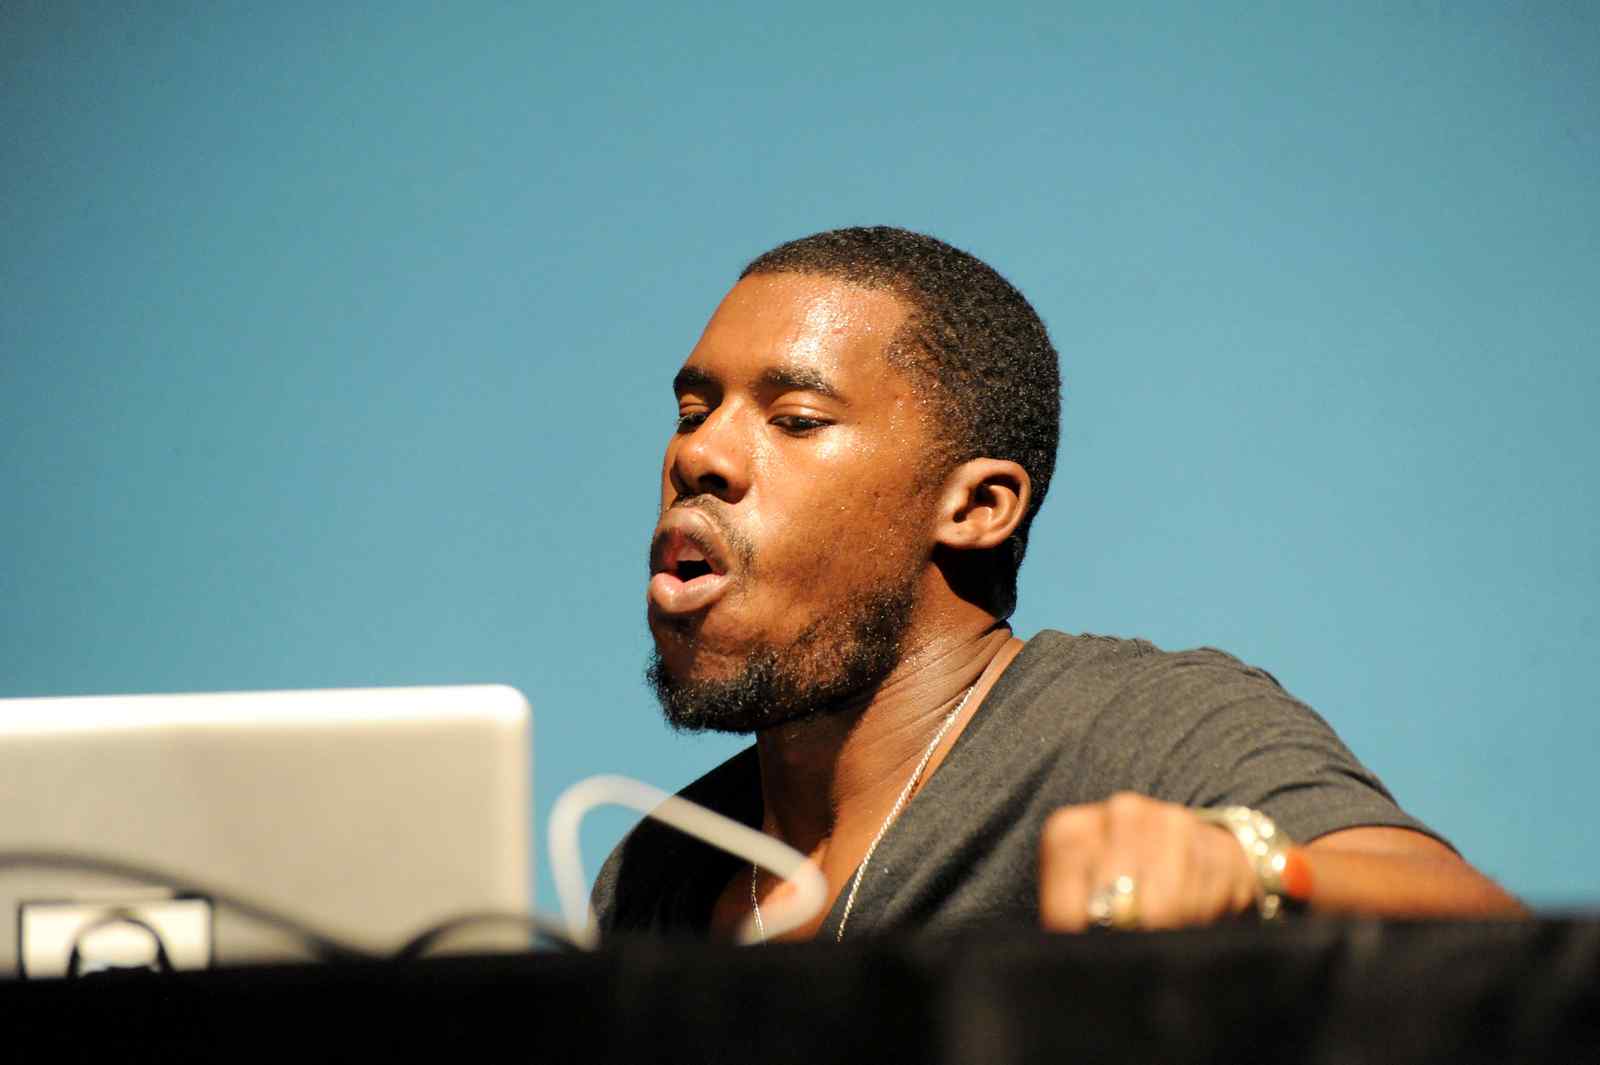 Revisiting Flying Lotus' Mystical Dreamscape, A Decade Later